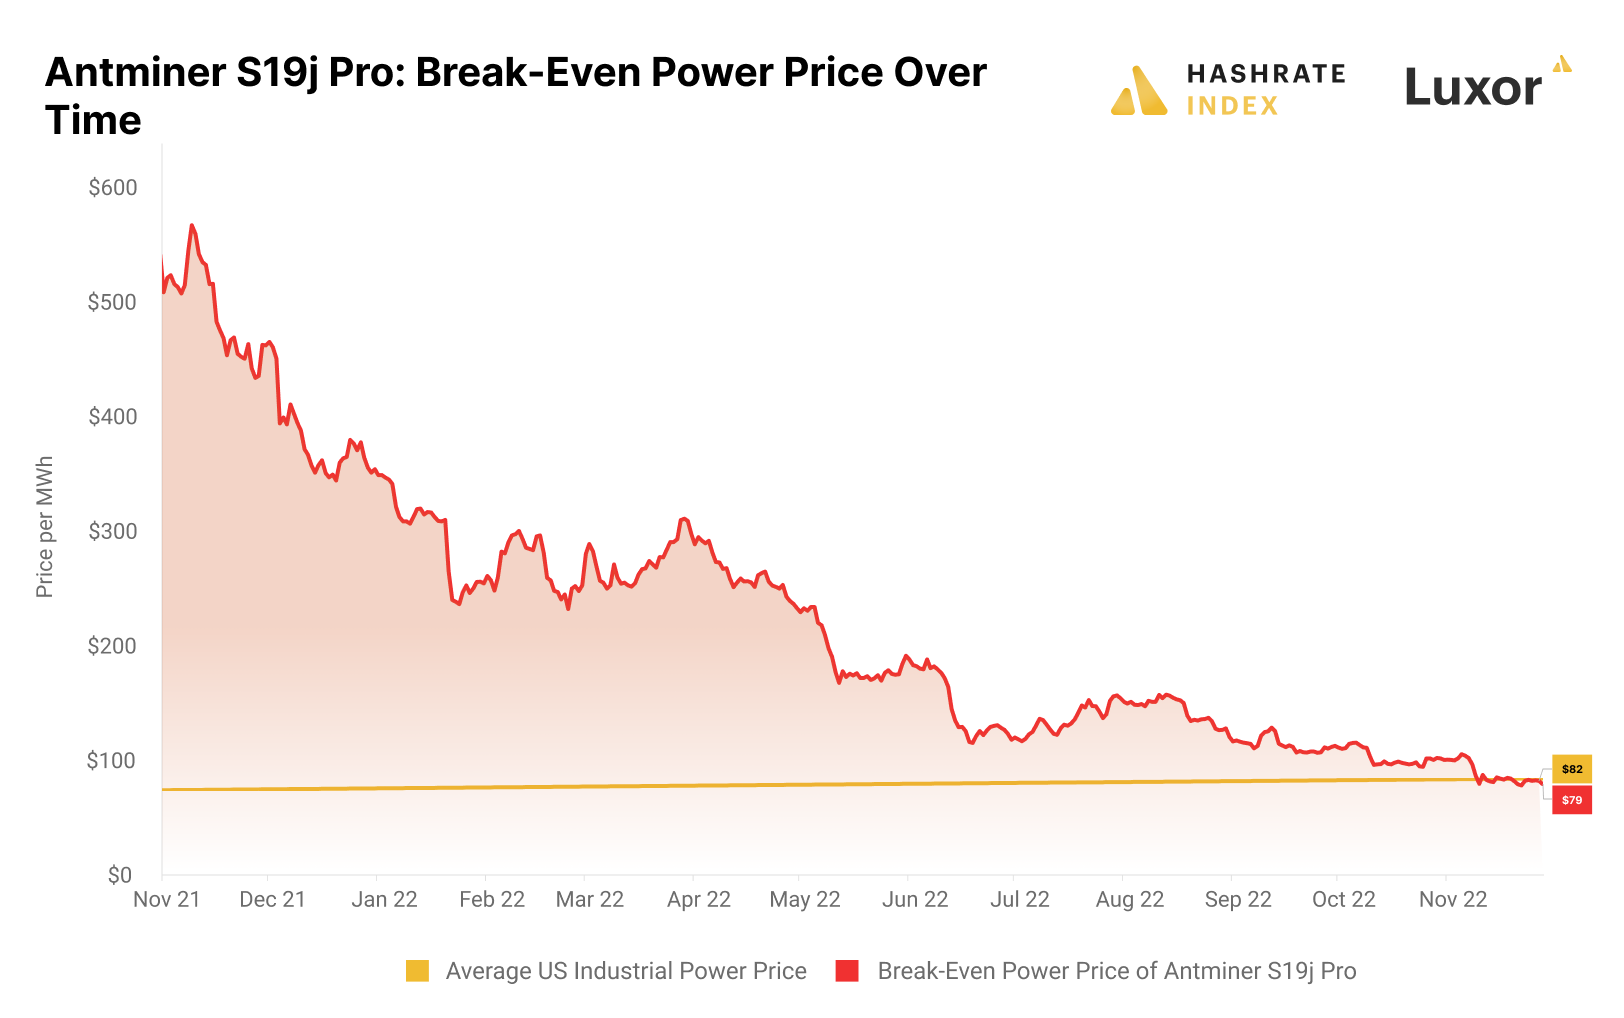 Antminer S19j Pro breakeven power price at average industrial rate in the US 